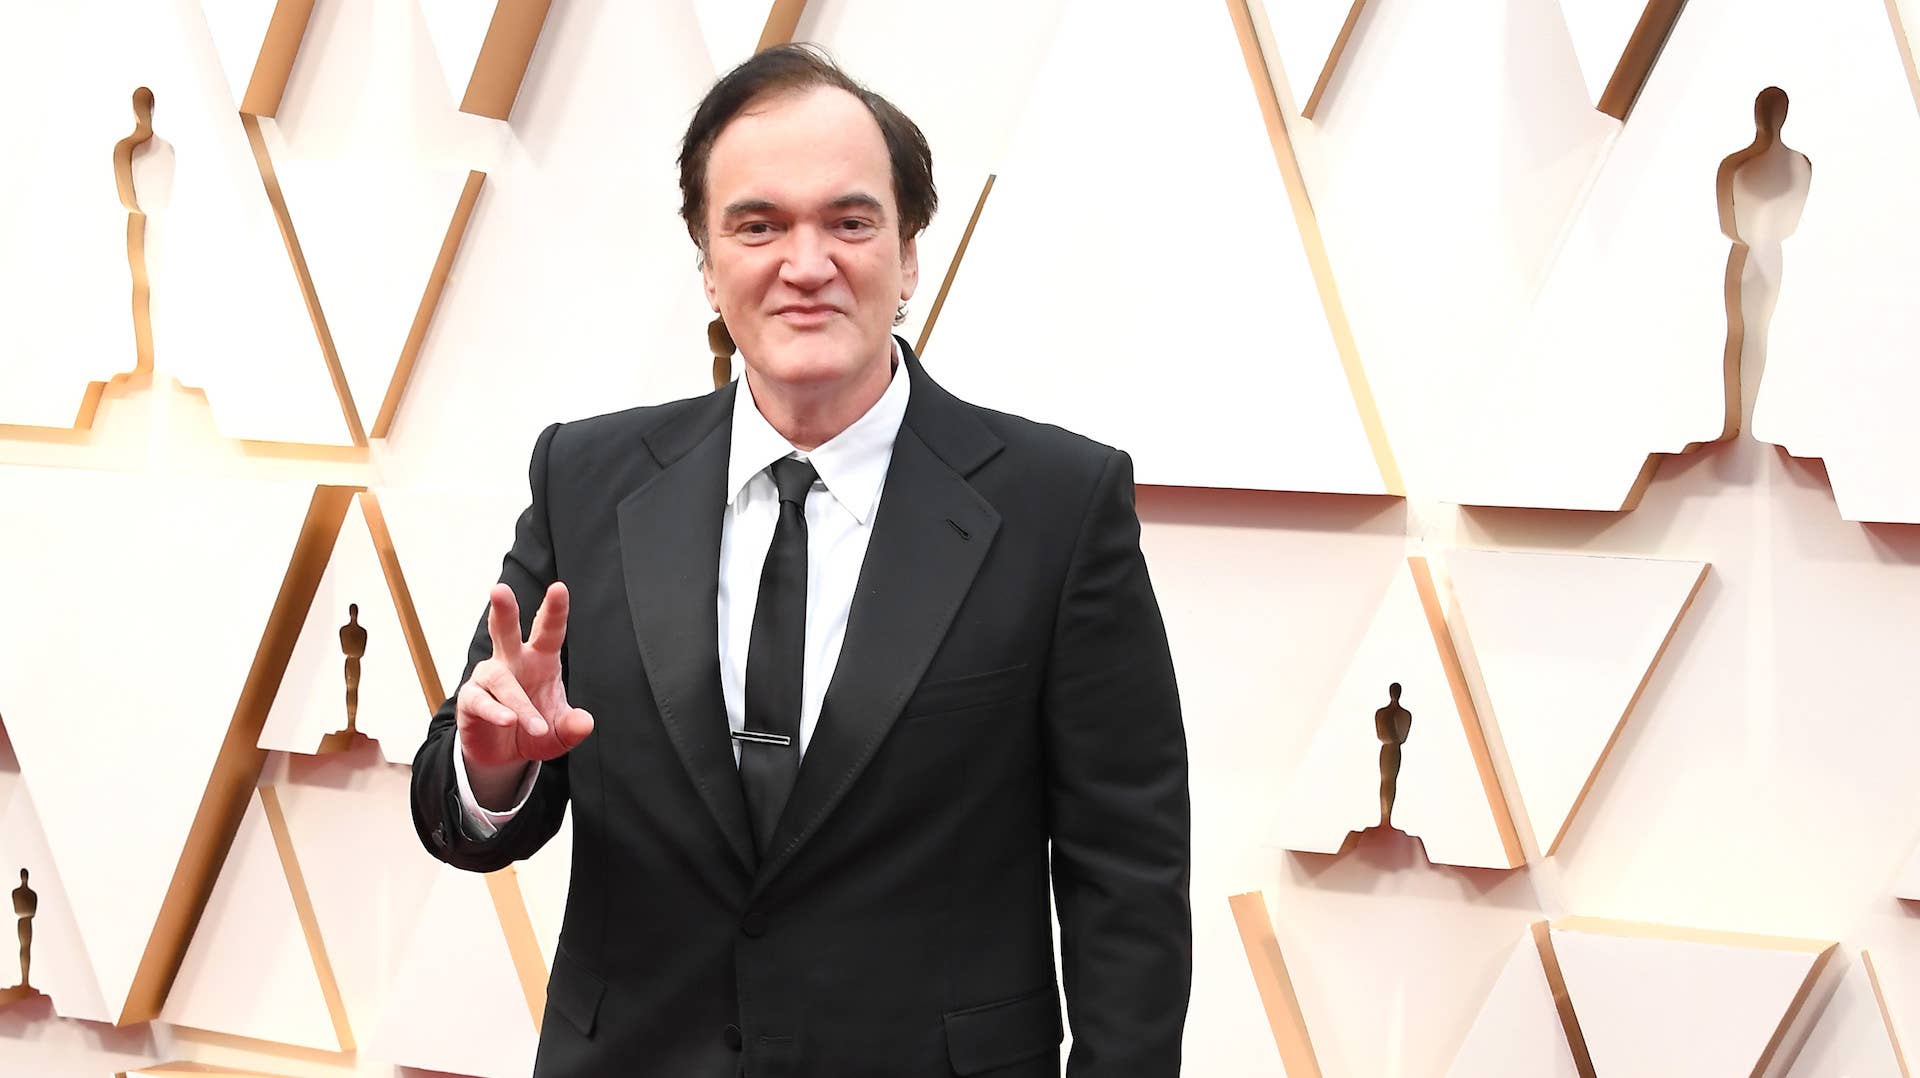 Quentin Tarantino arrives at the 92nd Annual Academy Awards